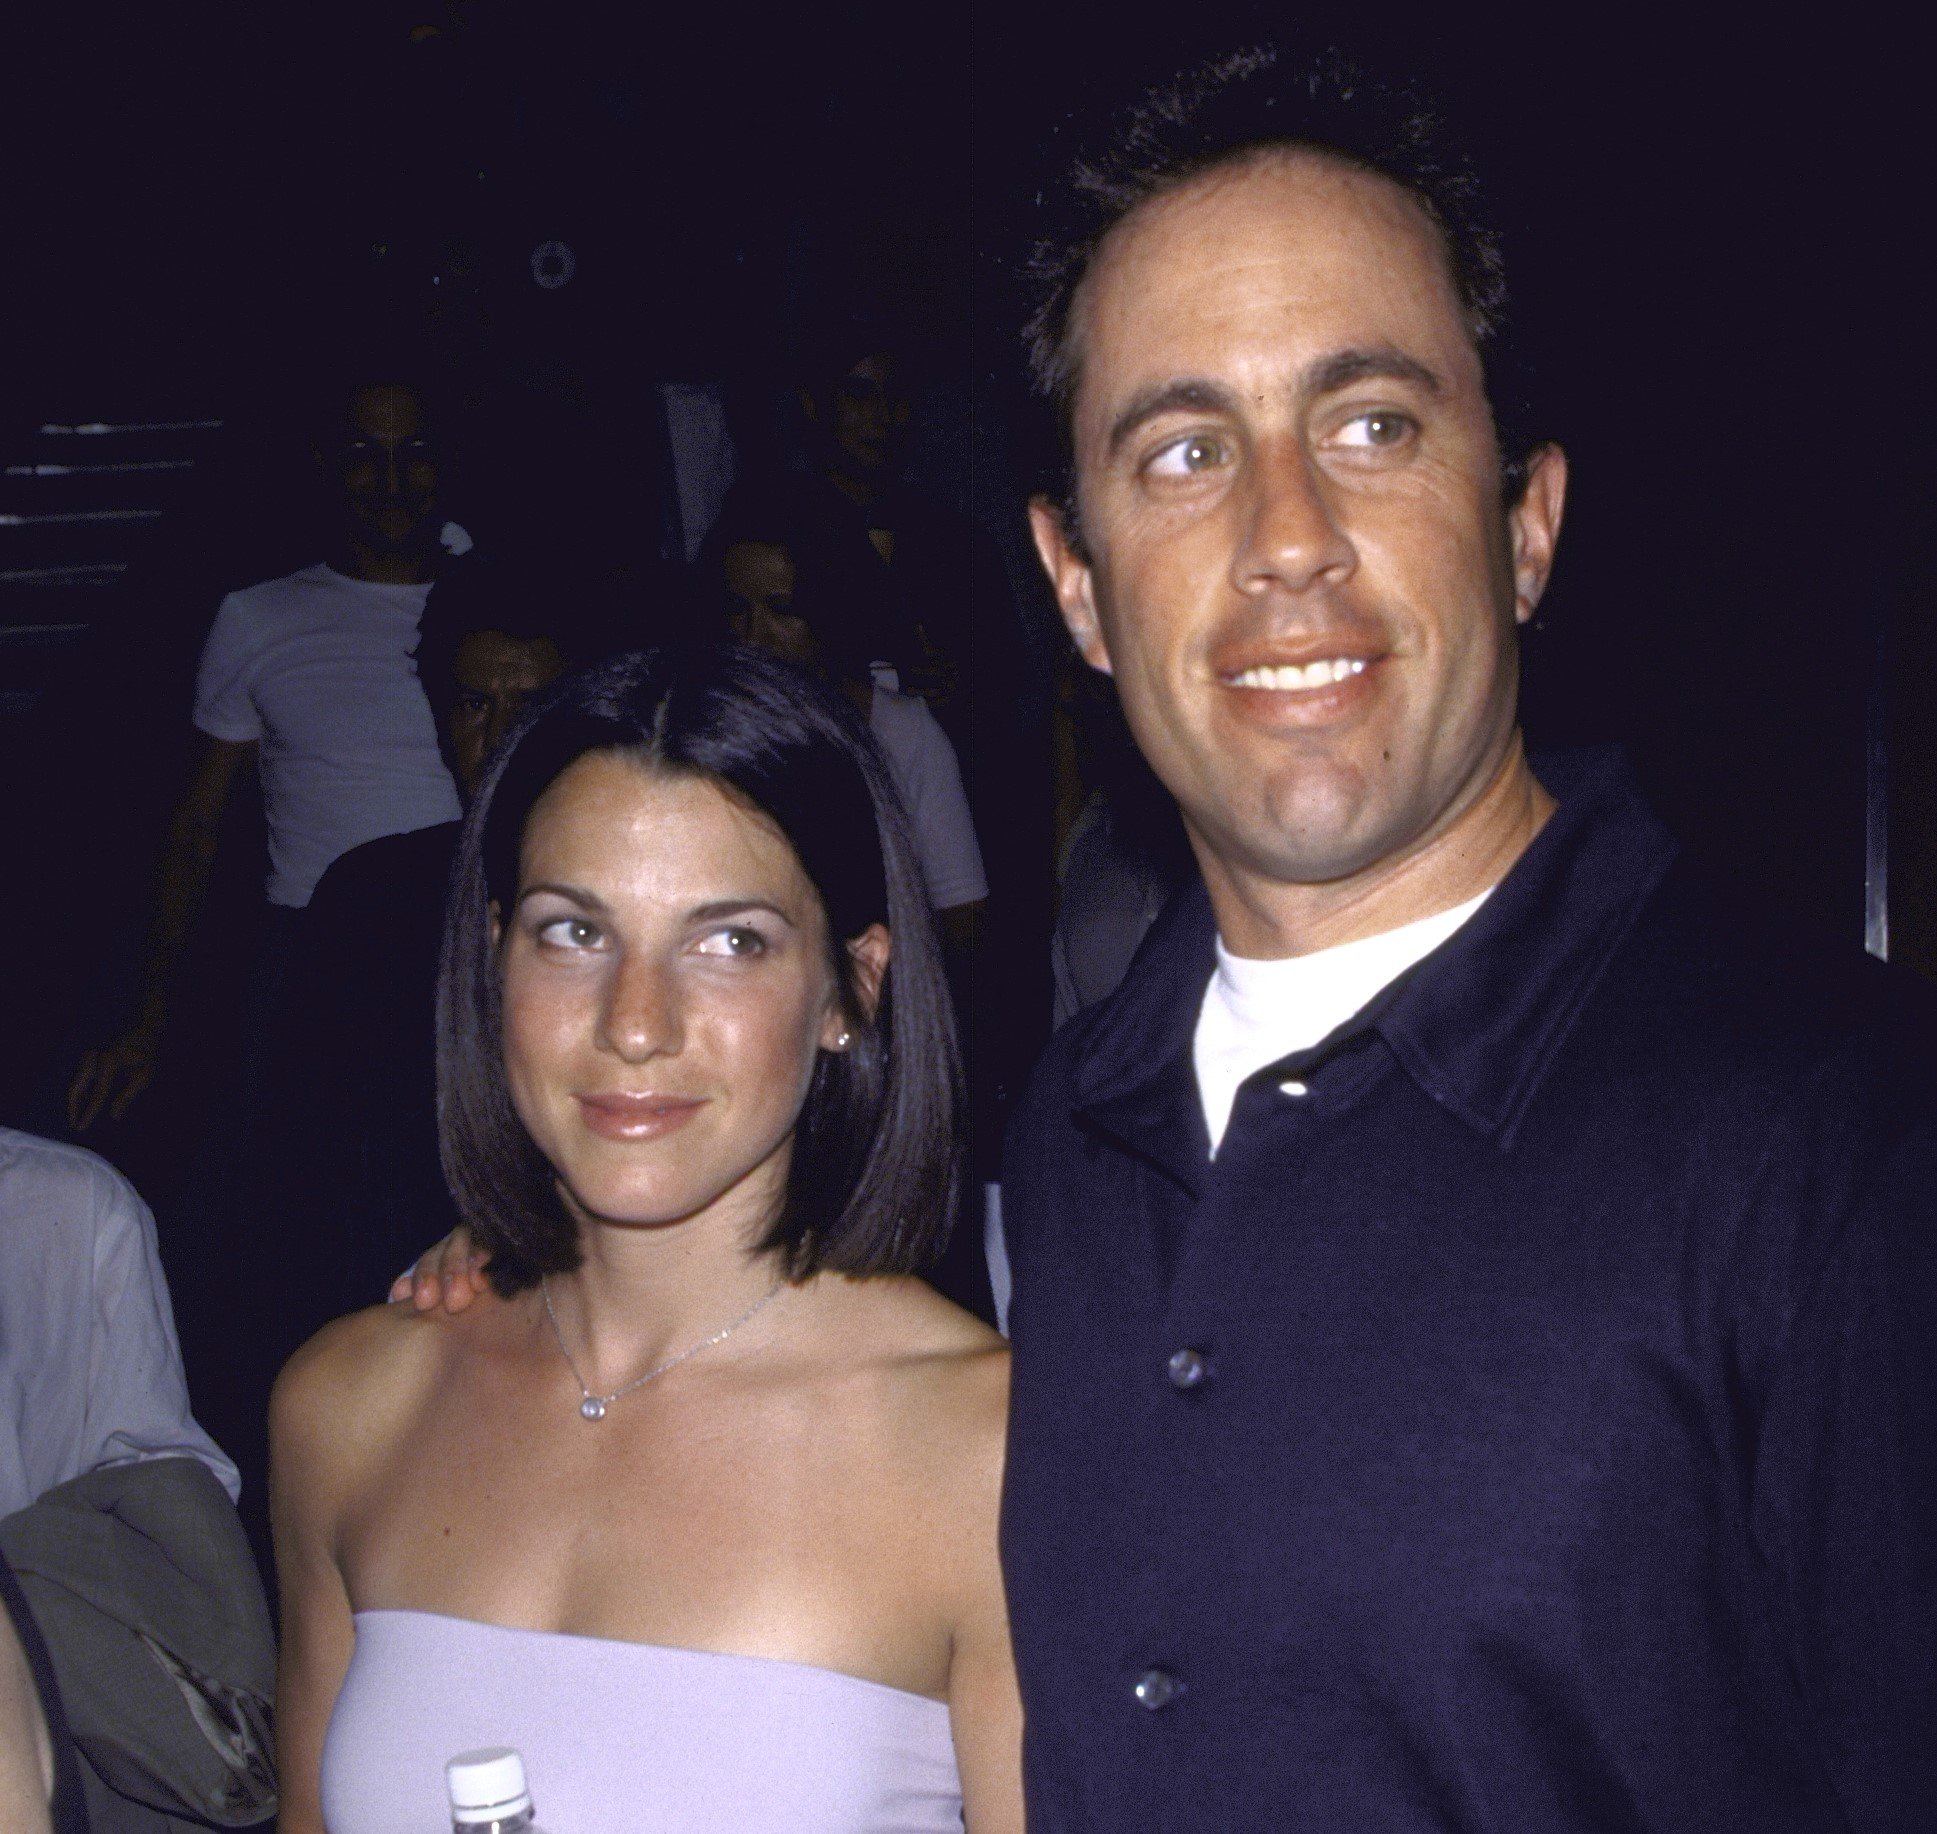 Jerry Seinfeld getting on wife Jessica Seinfeld's nerves